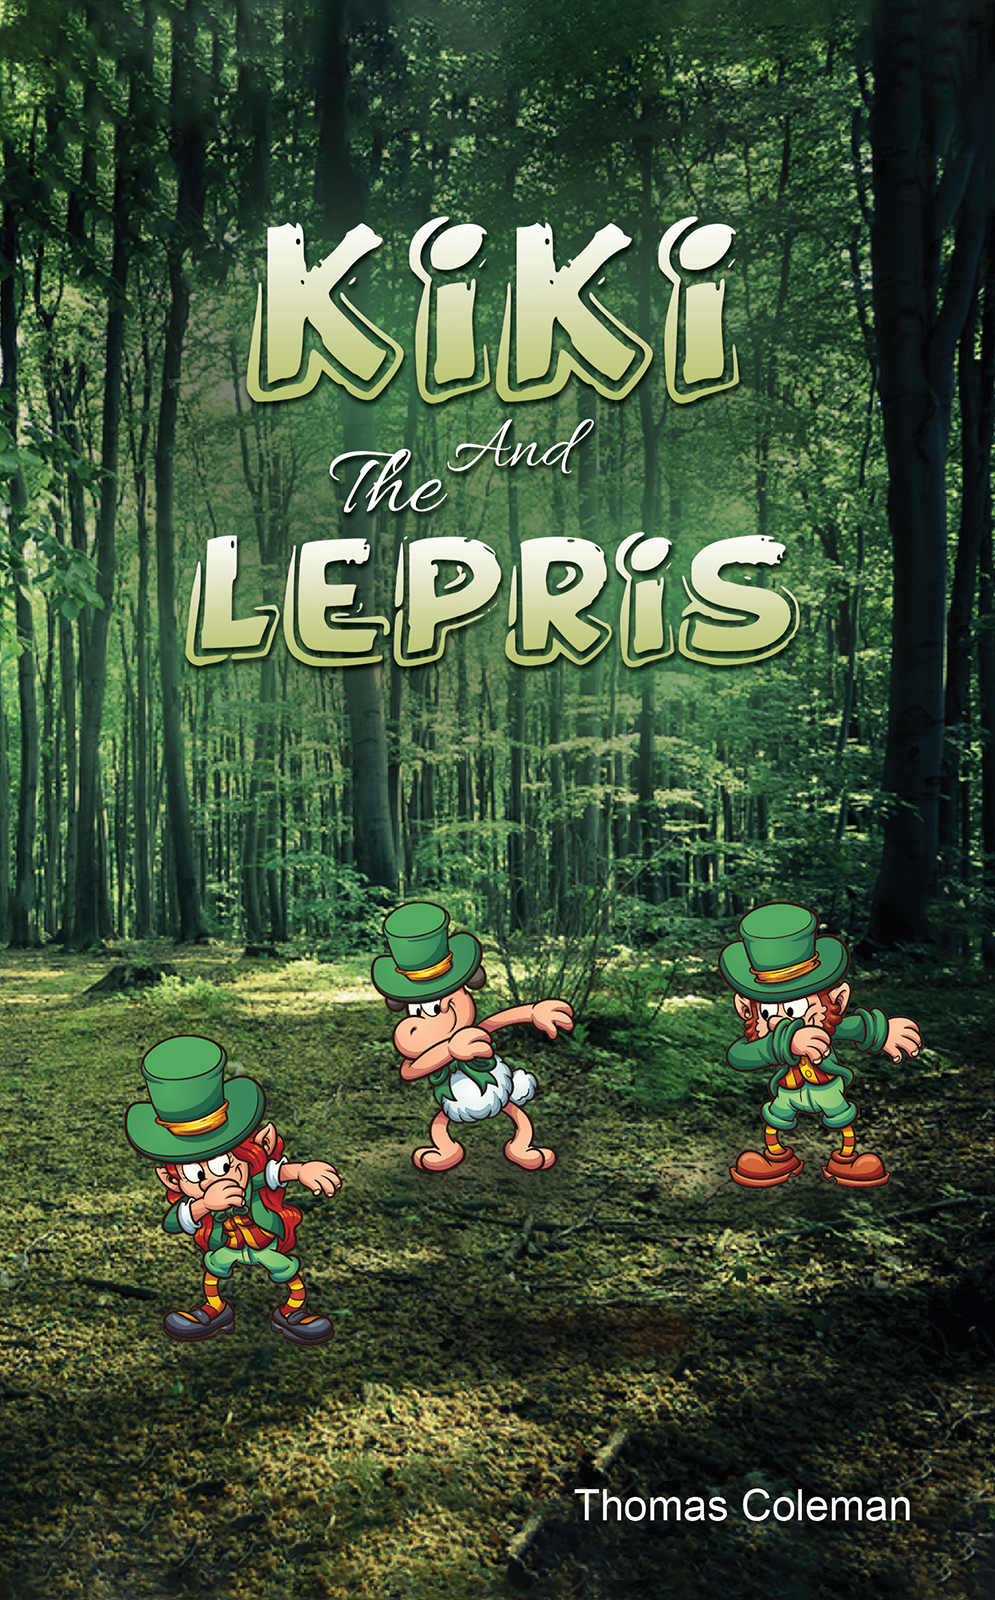 This image is the cover for the book Kiki and the Lepris